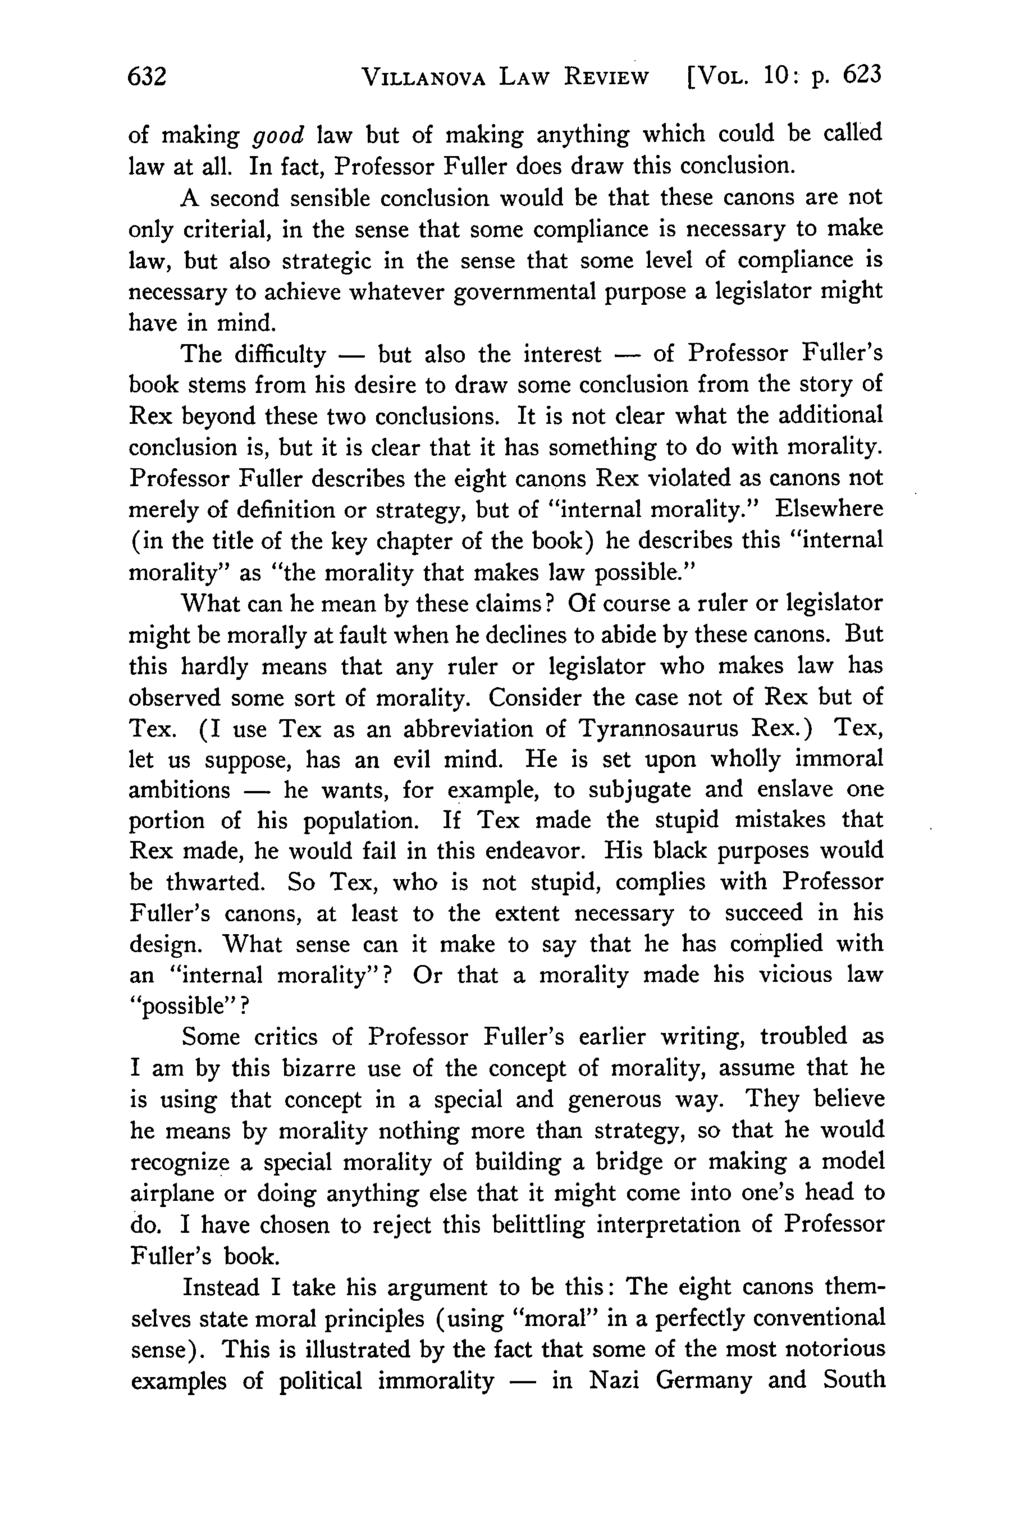 VILLANOVA LAW REVIEW [VOL. 10: p. 623 of making good law but of making anything which could be called law at all. In fact, Professor Fuller does draw this conclusion.